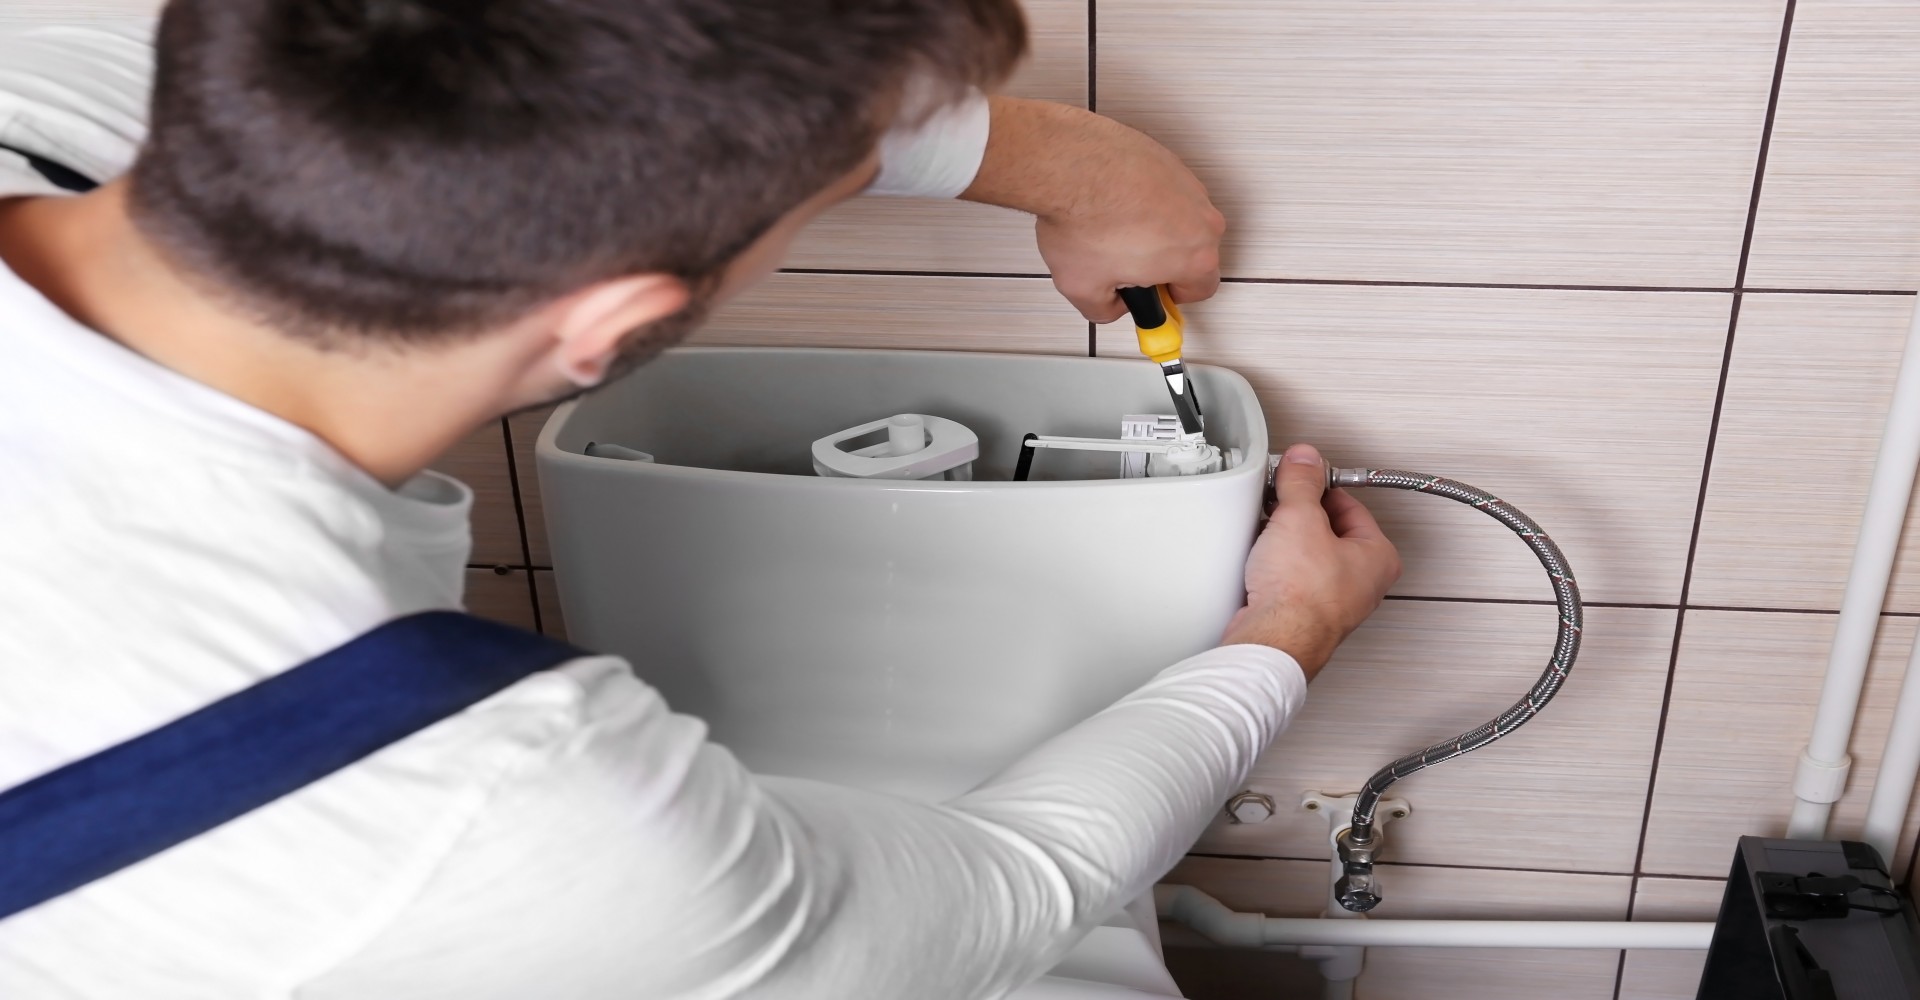 How Do You Fix a Running Toilet?